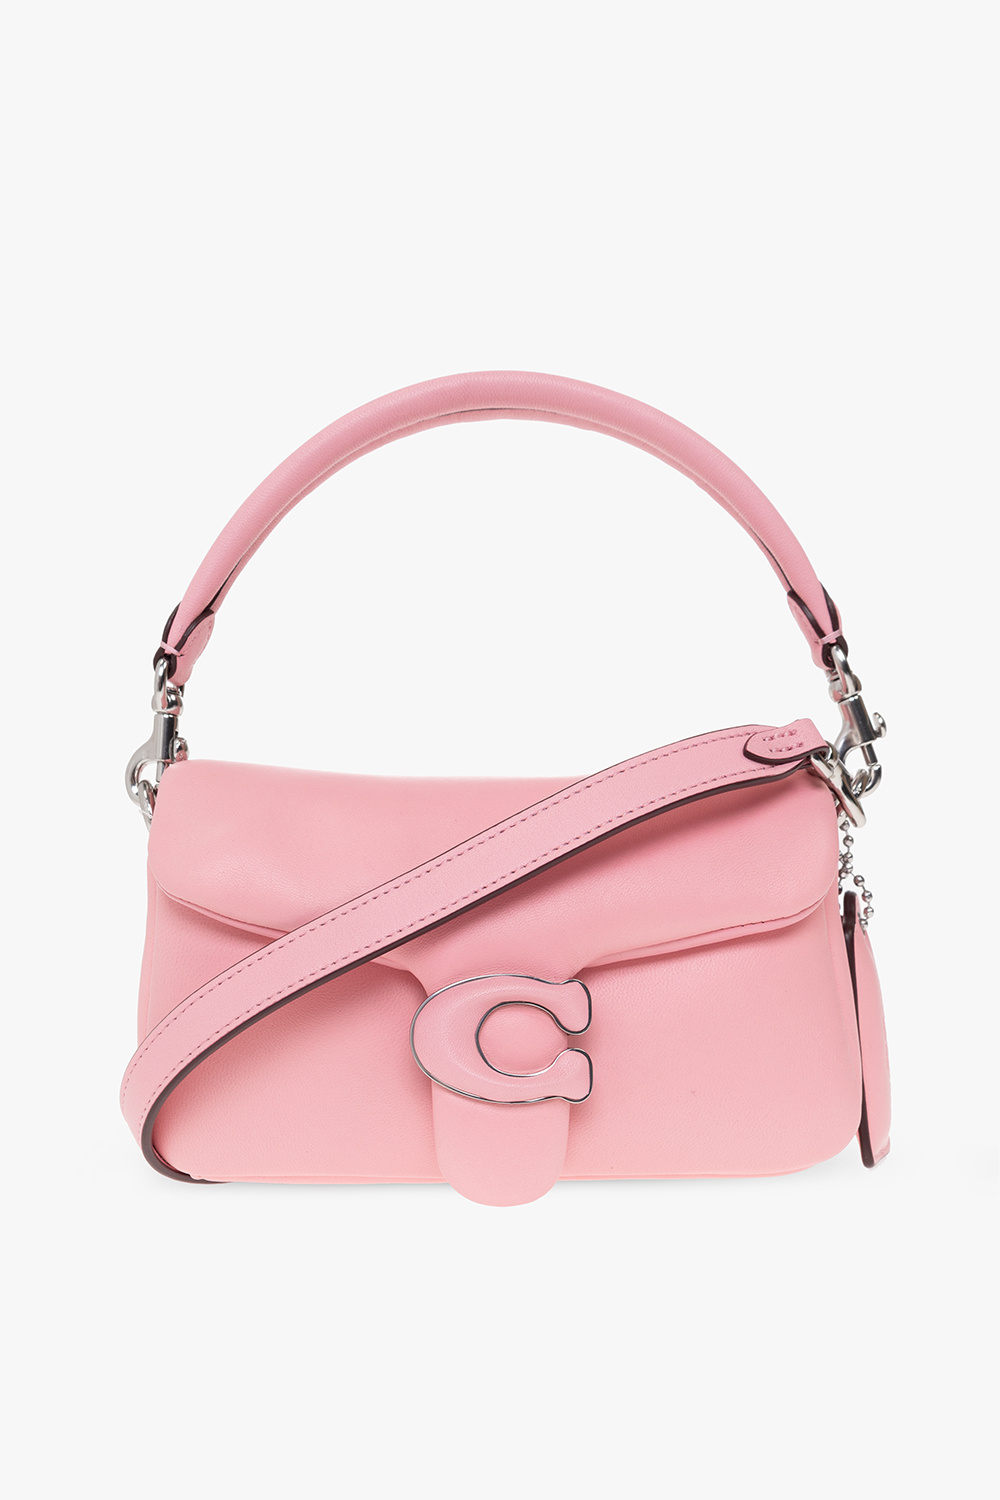 Coach Pillow Tabby 18 Pink Leather Cross-body Bag